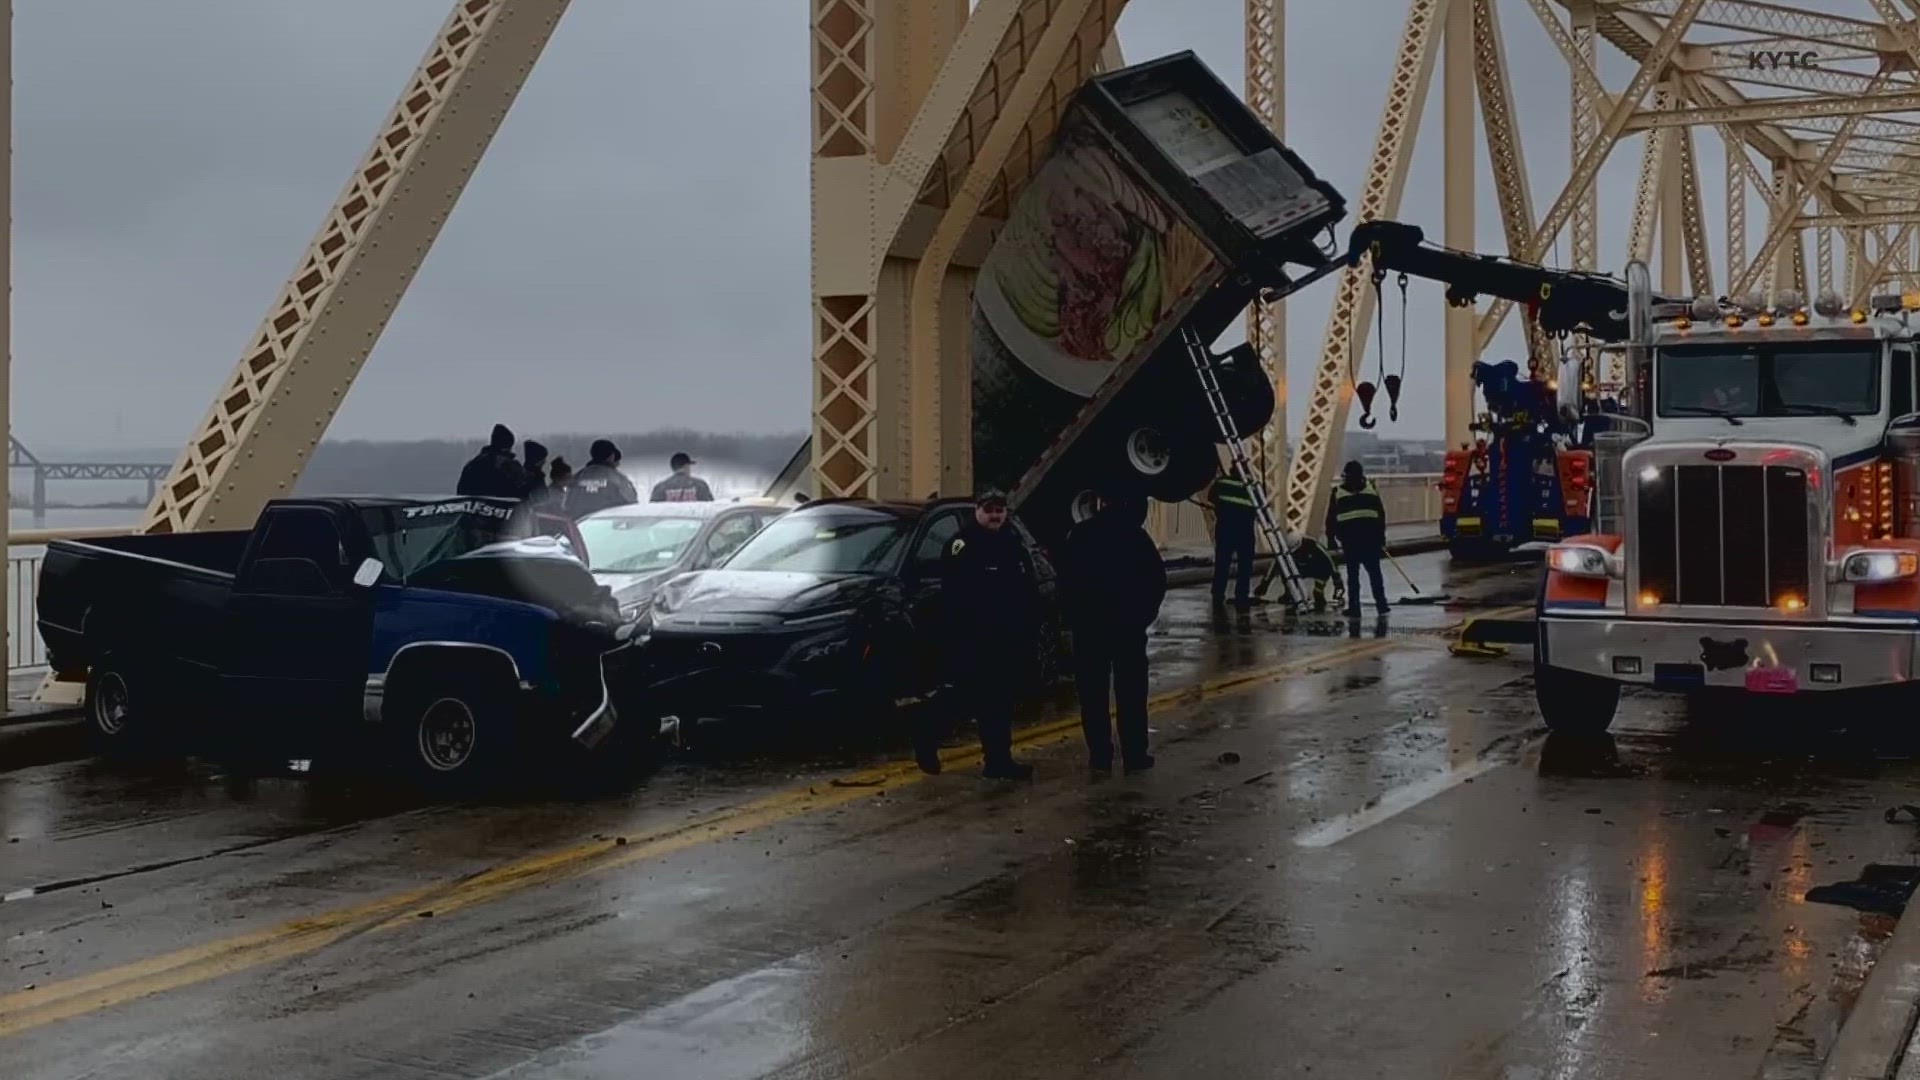 She's the driver whose car stalled on the Clark Memorial Bridge Friday, moments before a multi-car collision sent a Sysco semi over the edge.